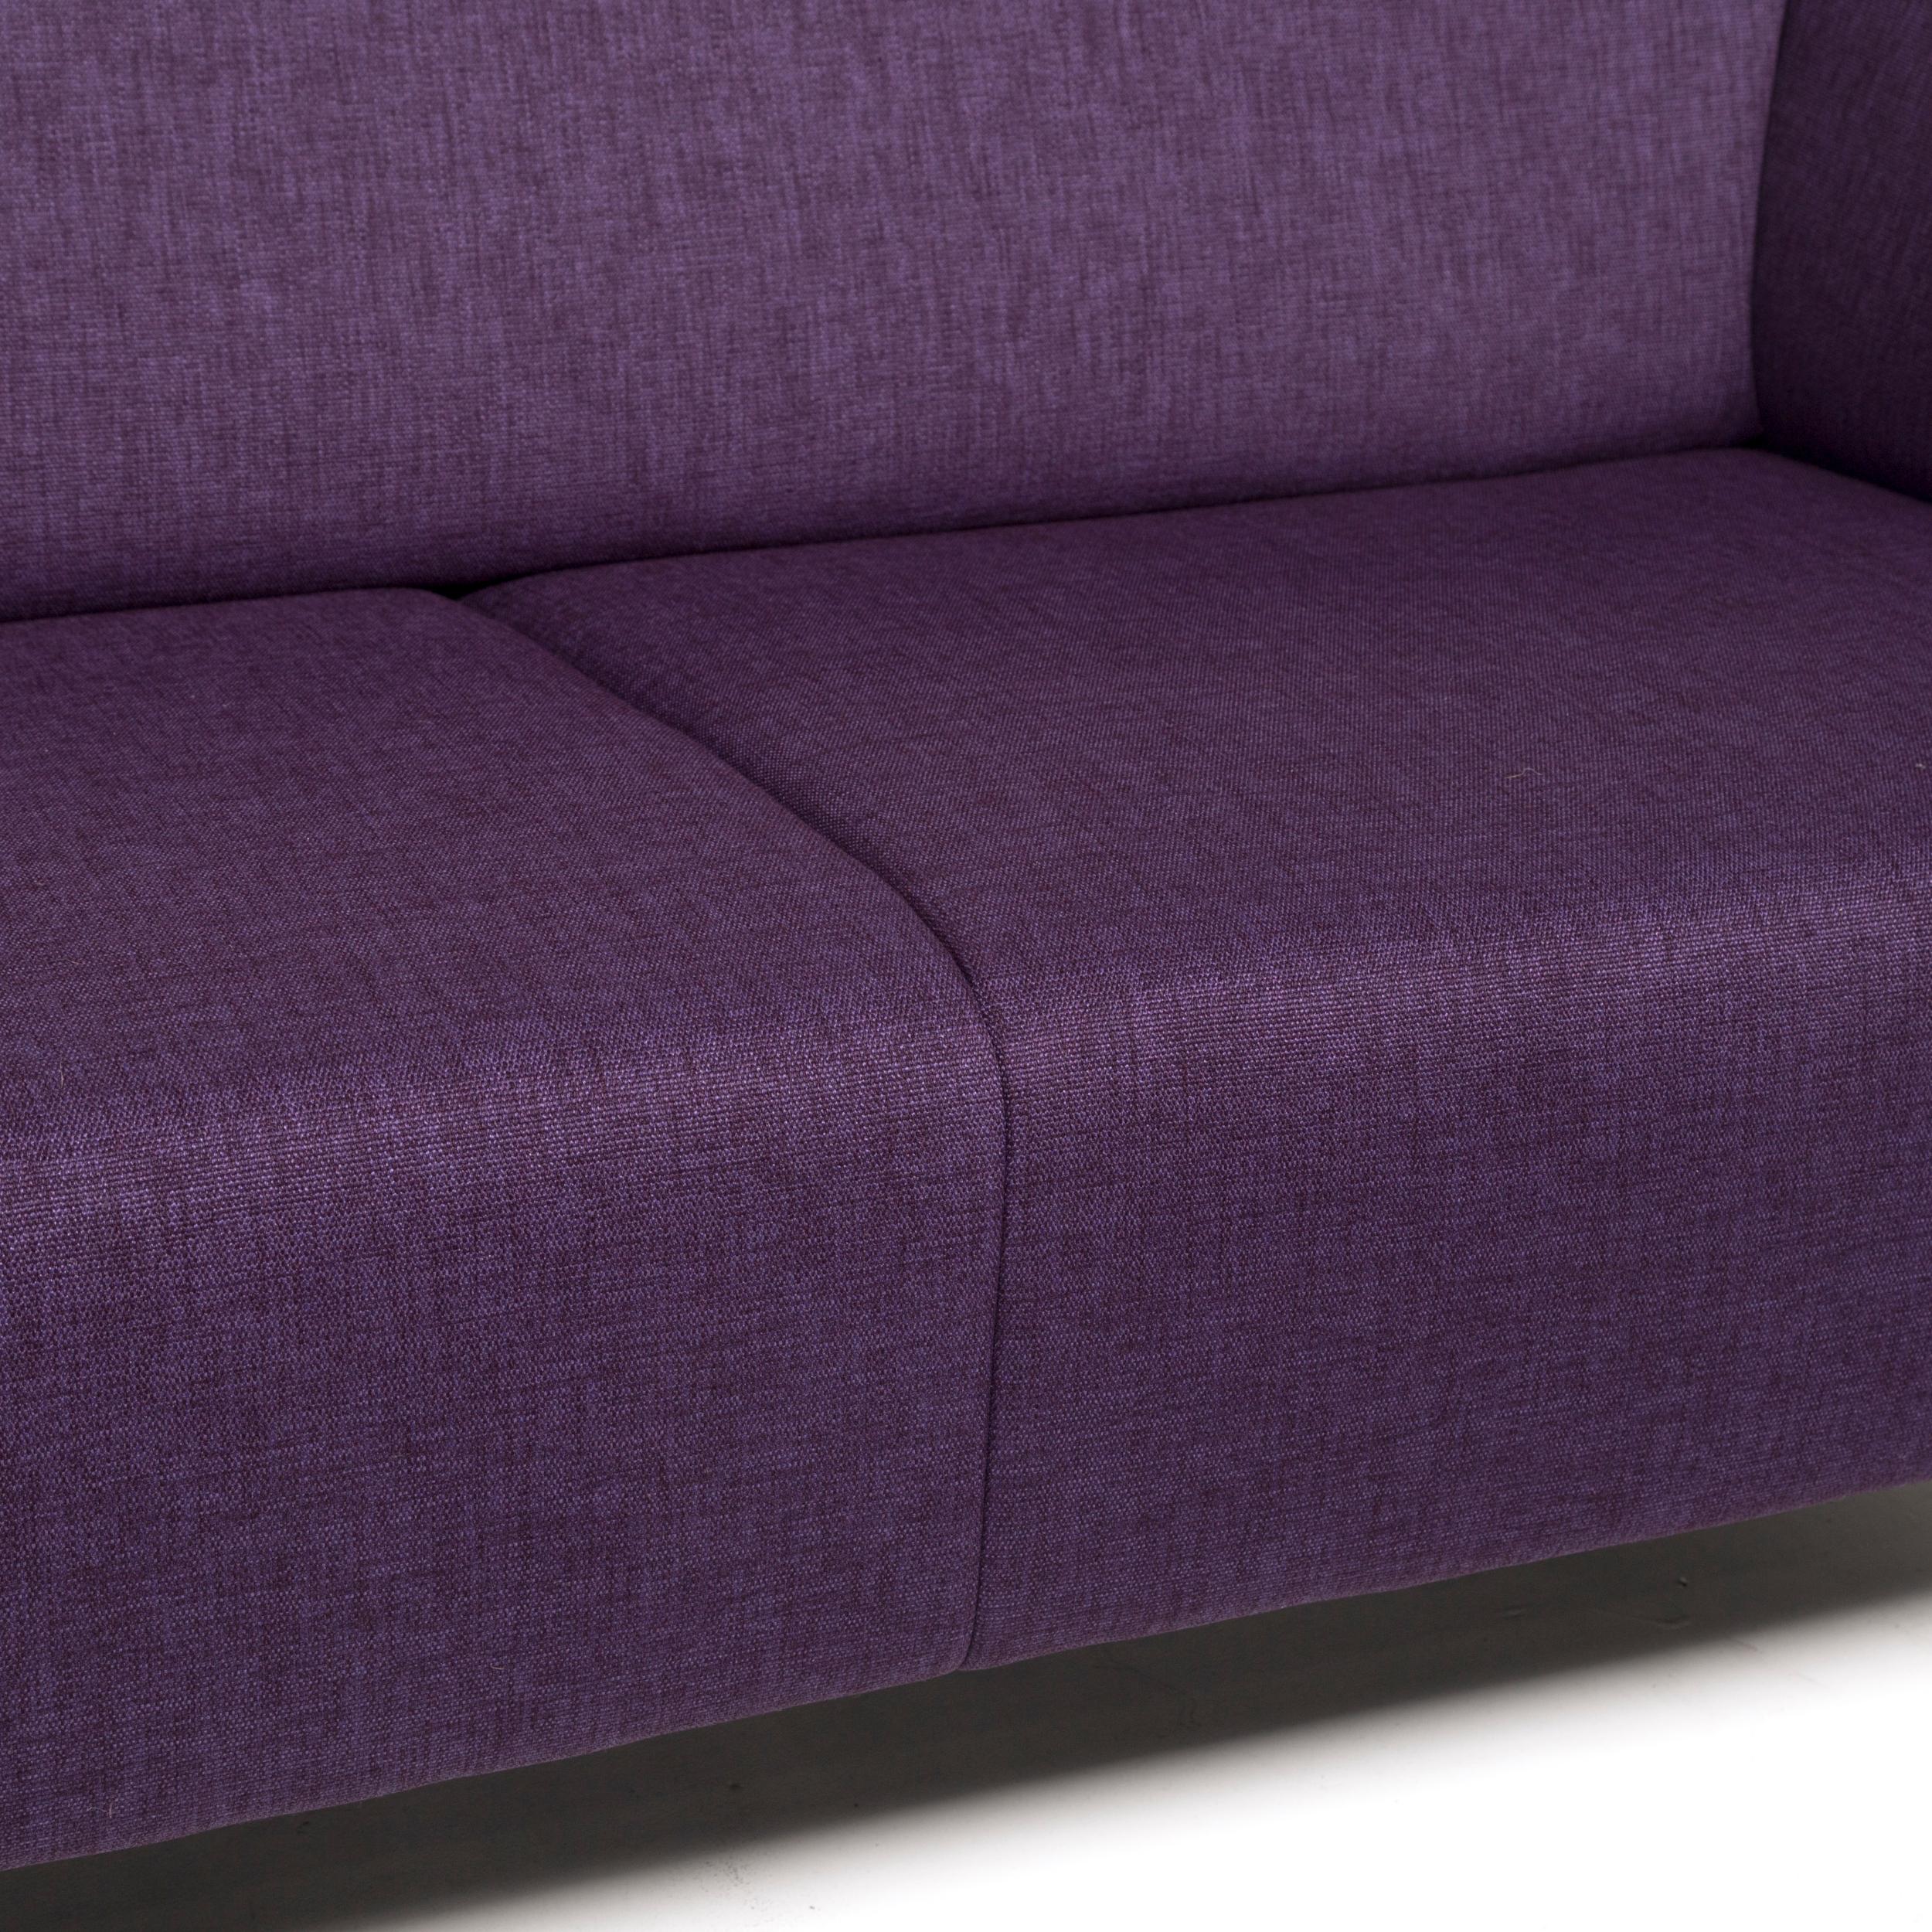 We bring to you a Rolf Benz fabric sofa purple three-seat couch.
 
 

 Product measurements in centimeters:
 

Depth 83
Width 174
Height 74
Seat-height 43
Rest-height 69
Seat-depth 55
Seat-width 124
Back-height 33.